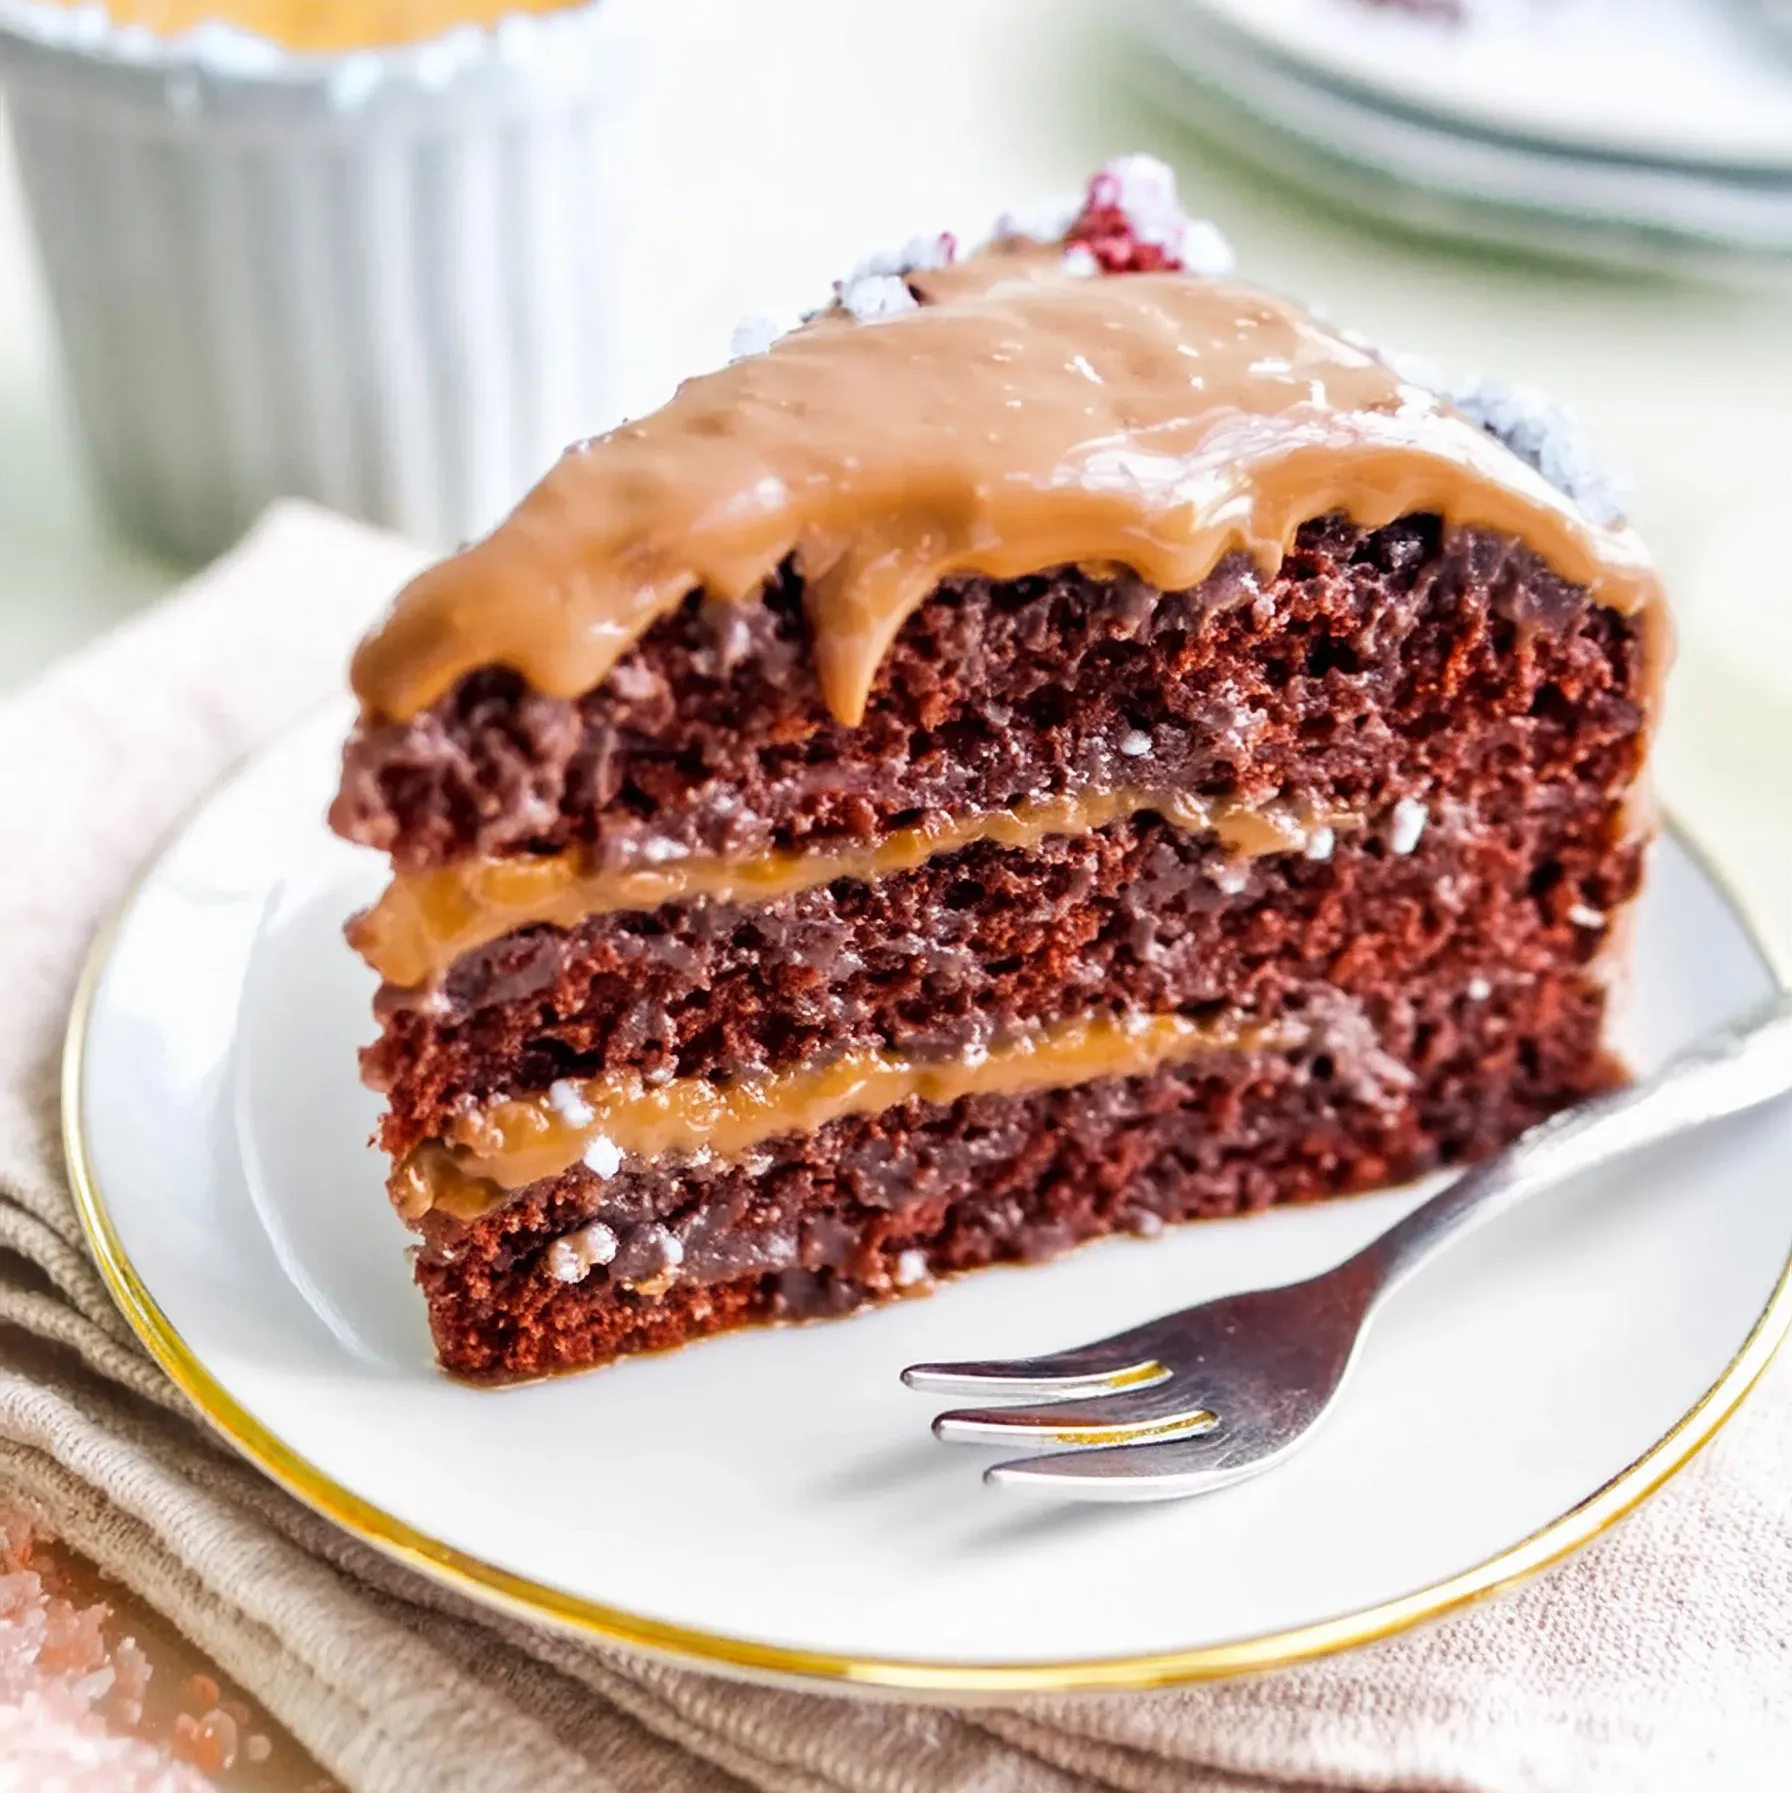 A slice of Decadent Caramel Bliss Cake with rich chocolate layers and creamy caramel frosting